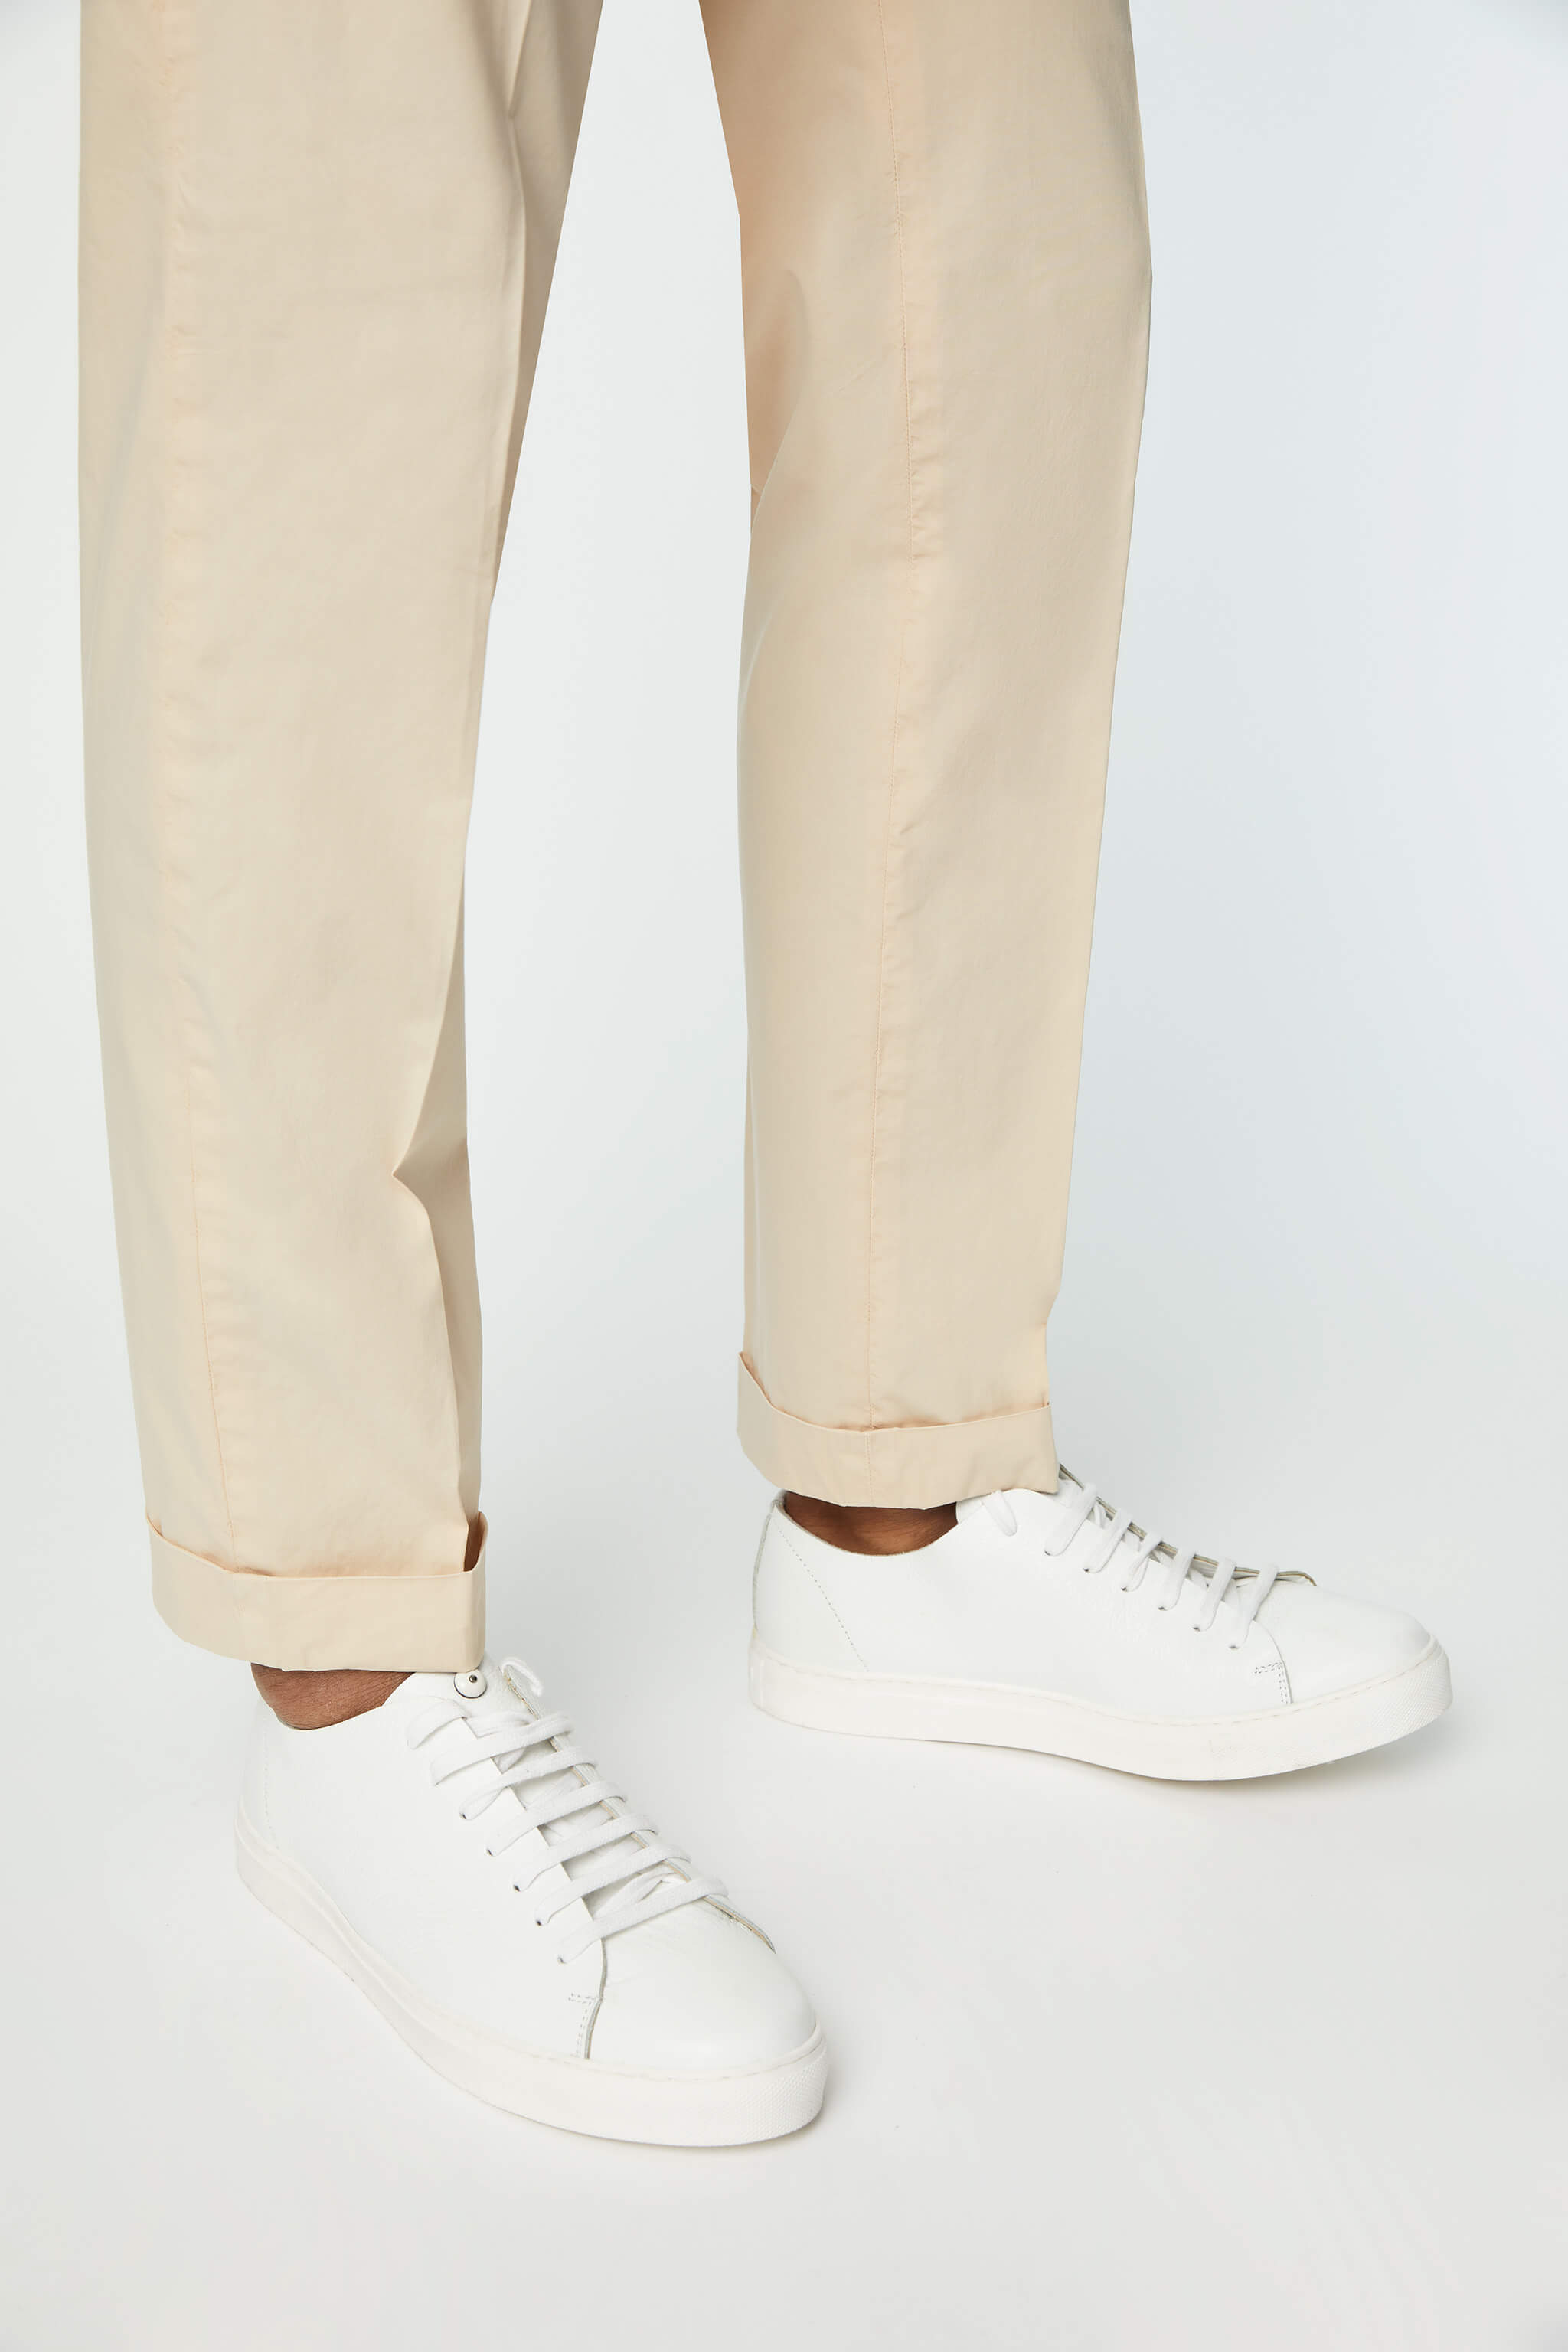 Garment-dyed PHIL pants in White